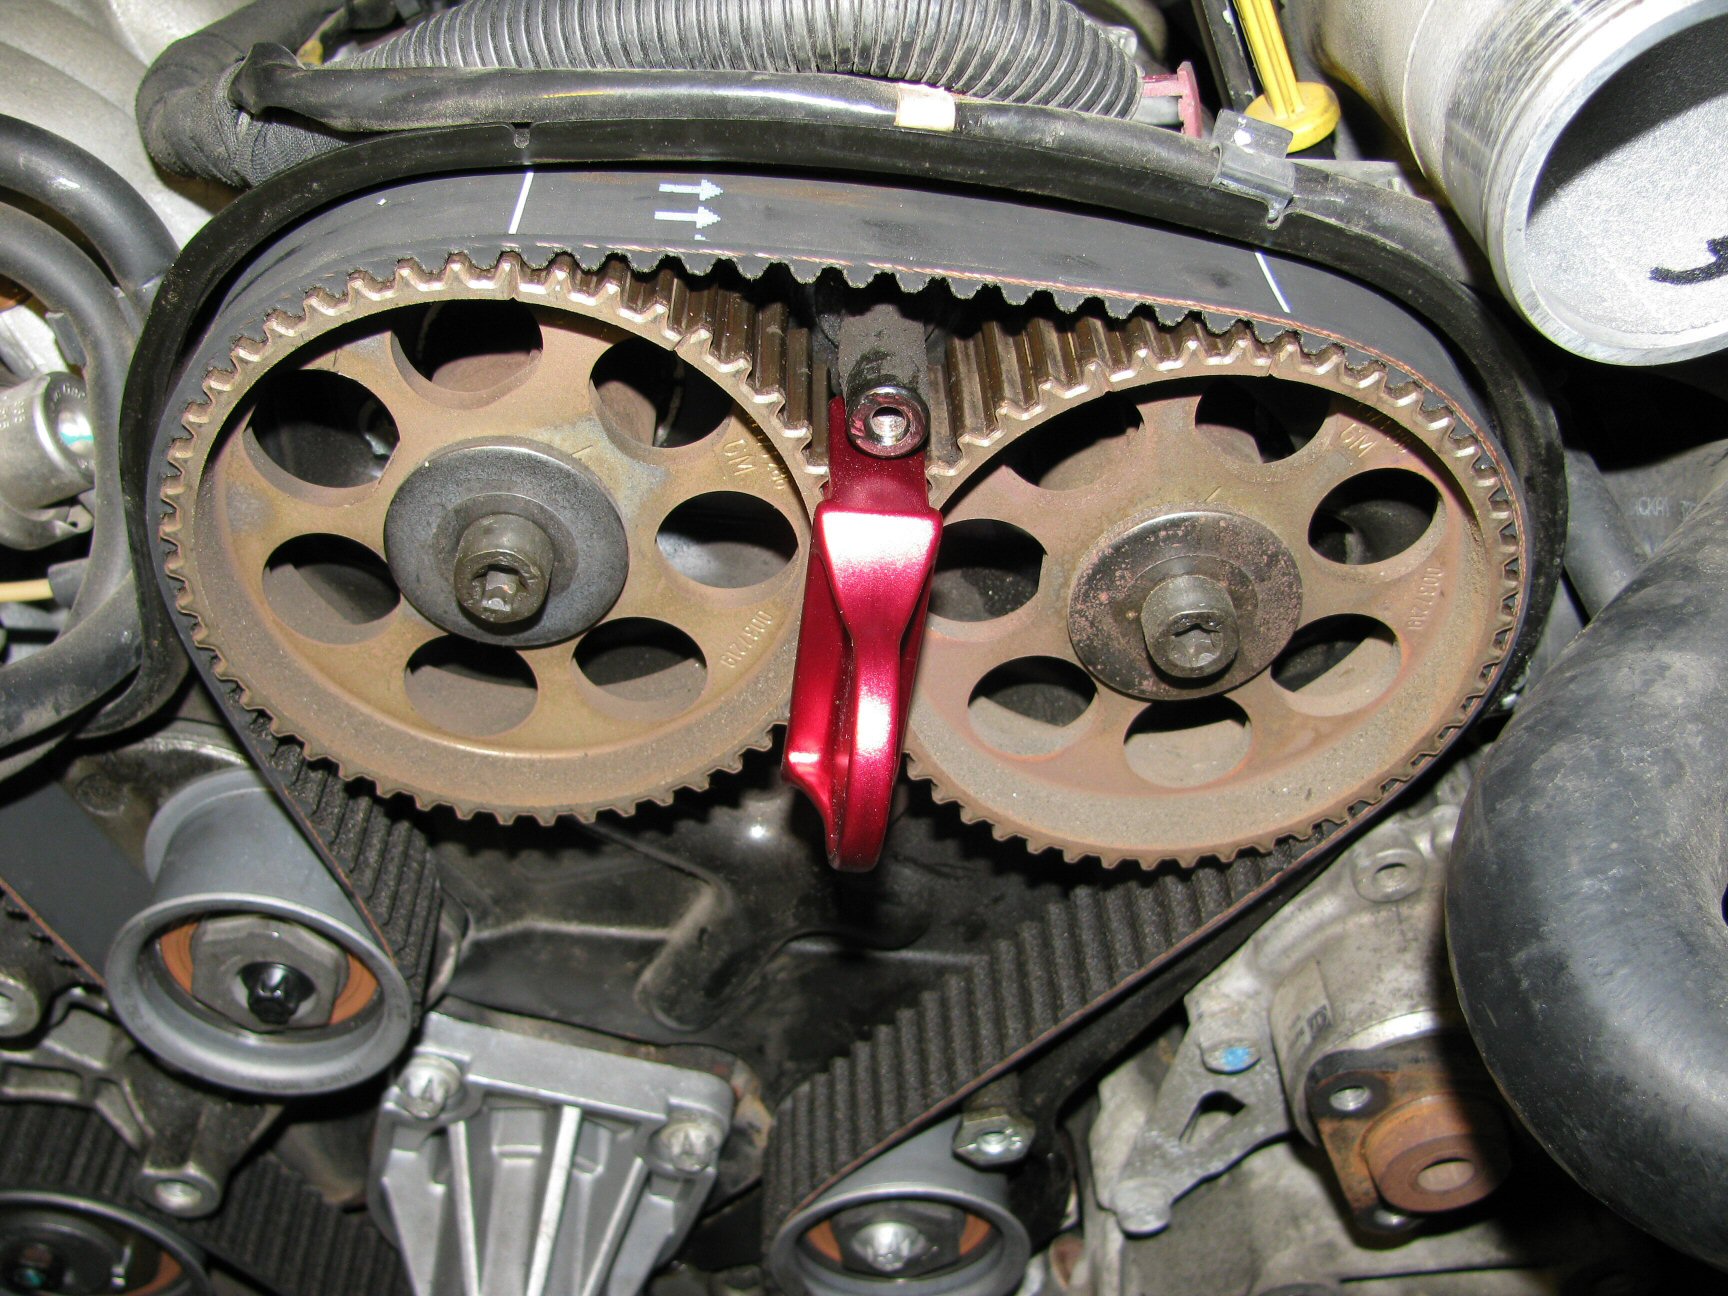 New belt positioned on camshaft pulleys 3 and 4. Note the white lines on the belt. Note also the arrows indicating the direction of belt rotation.